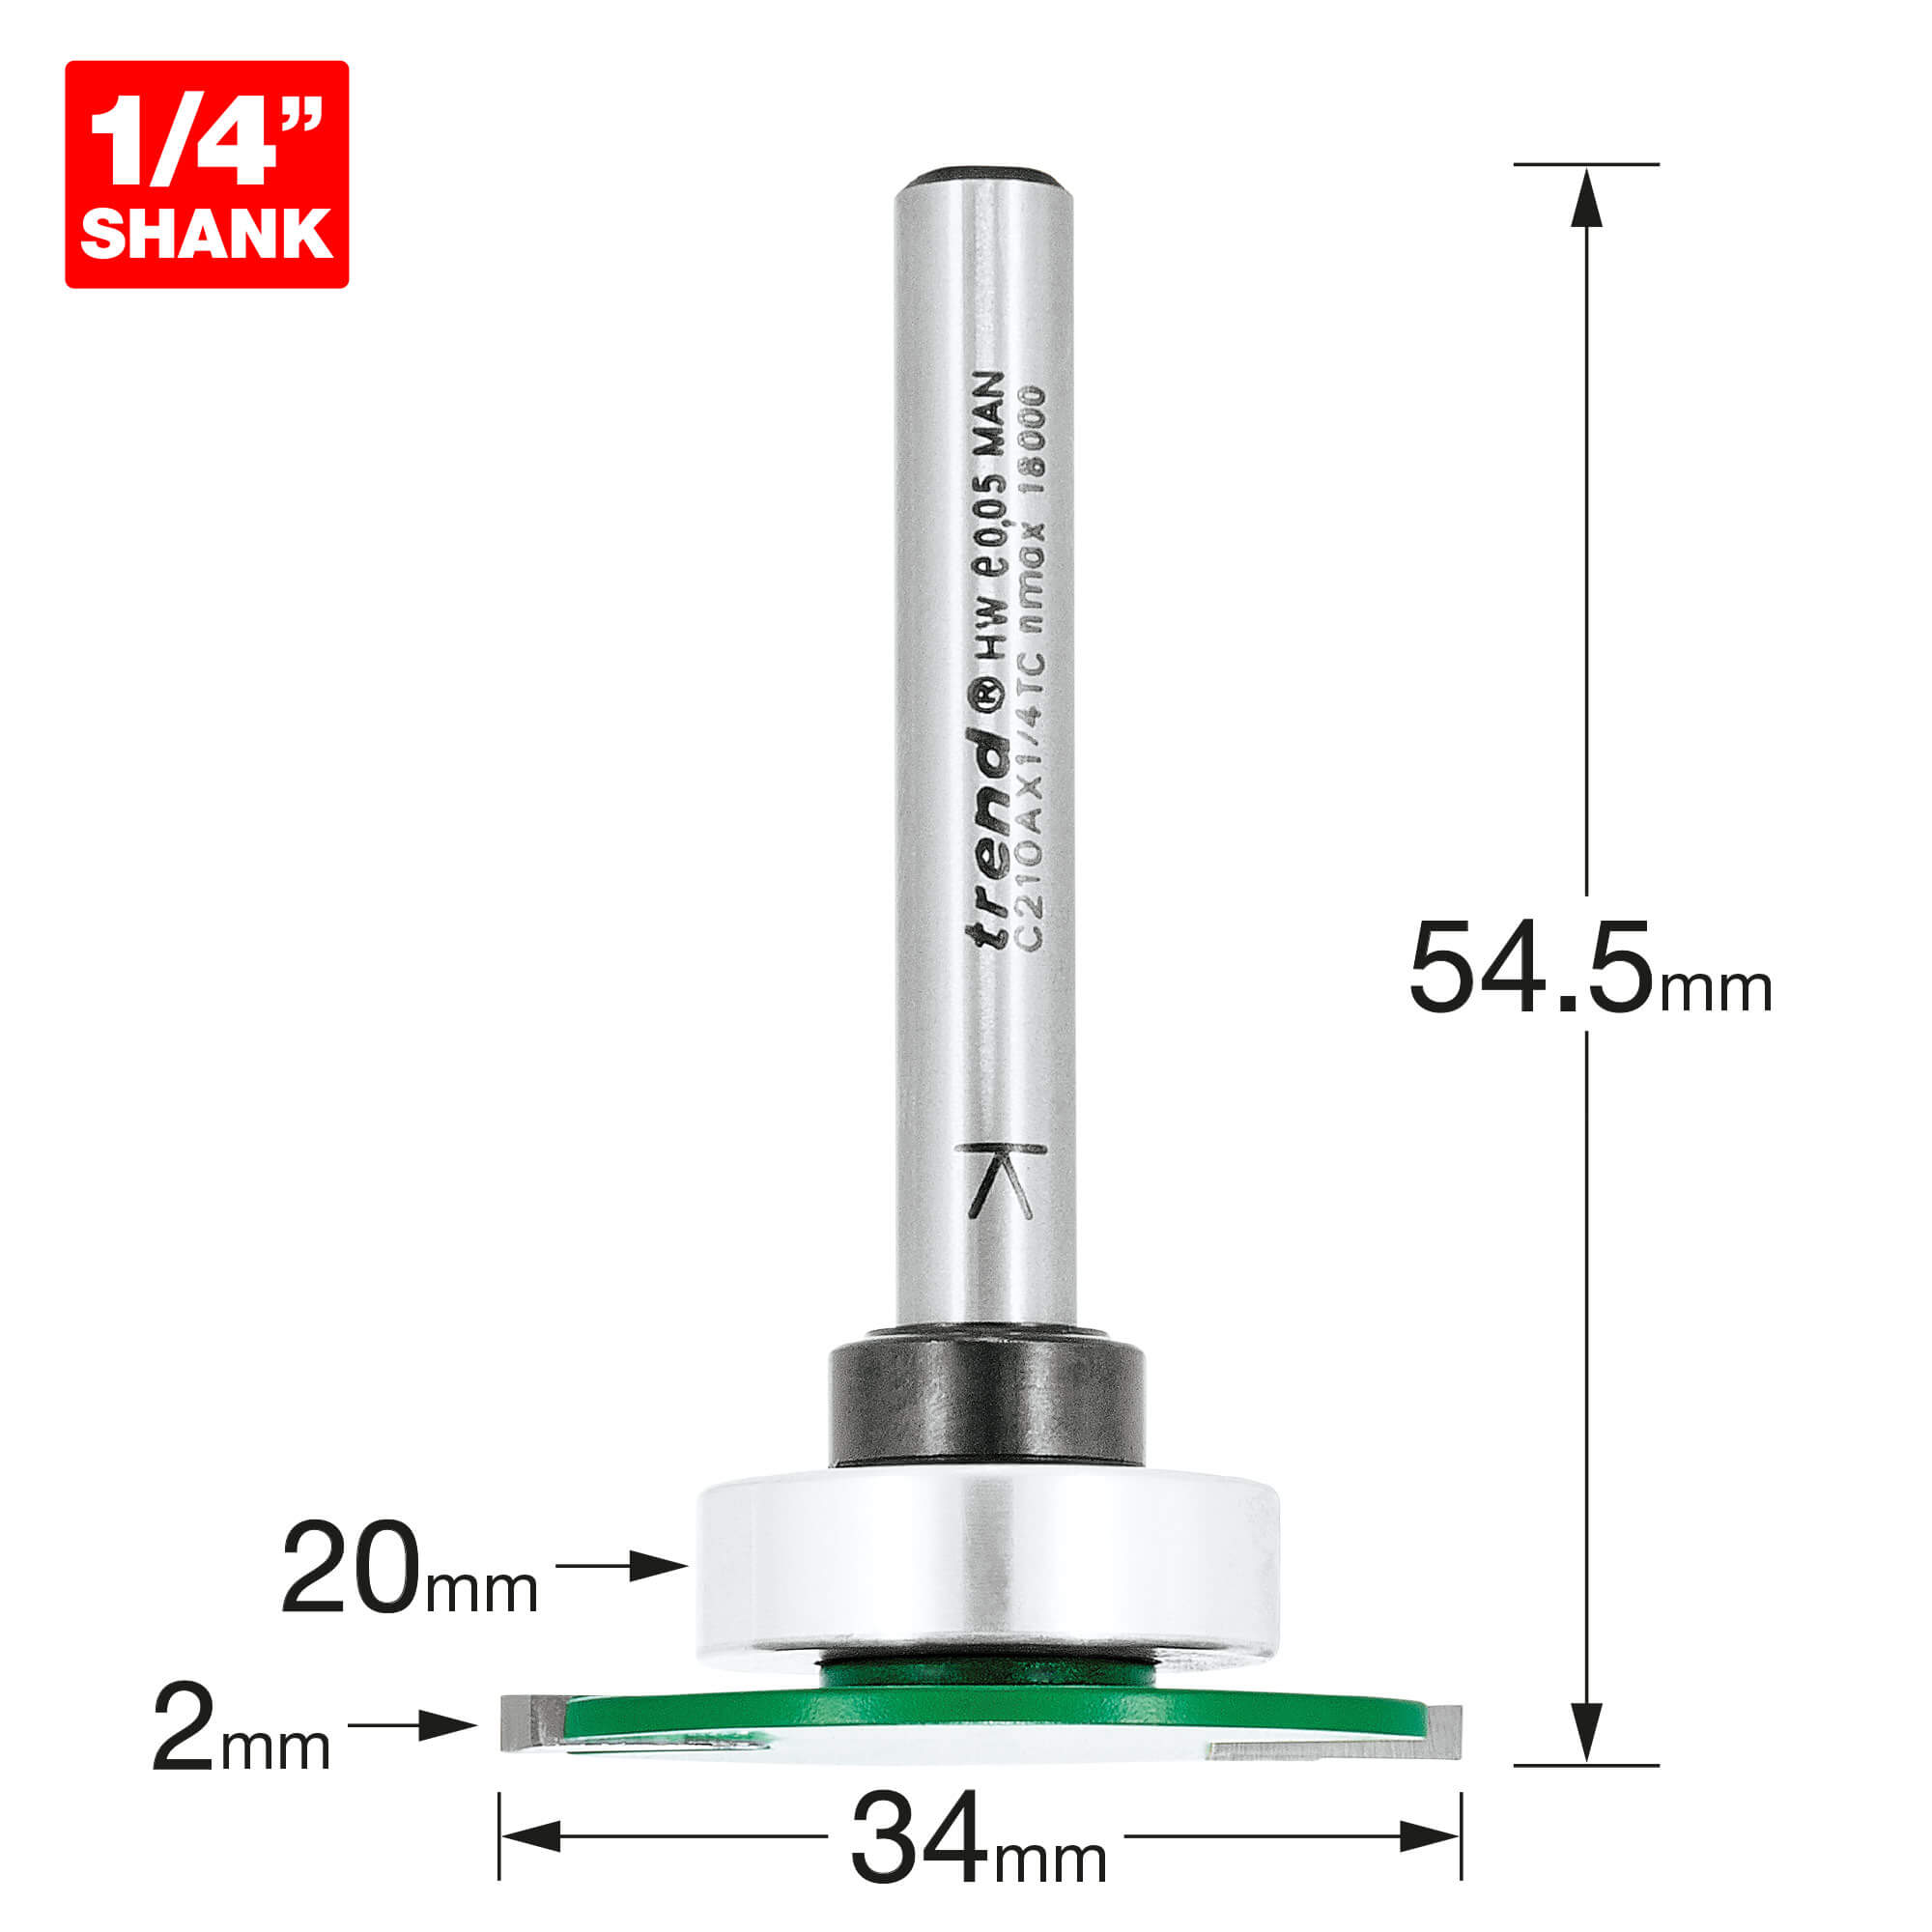 Image of Trend CRAFTPRO Weatherseal Groover Router Cutter 34mm 2mm 1/4"